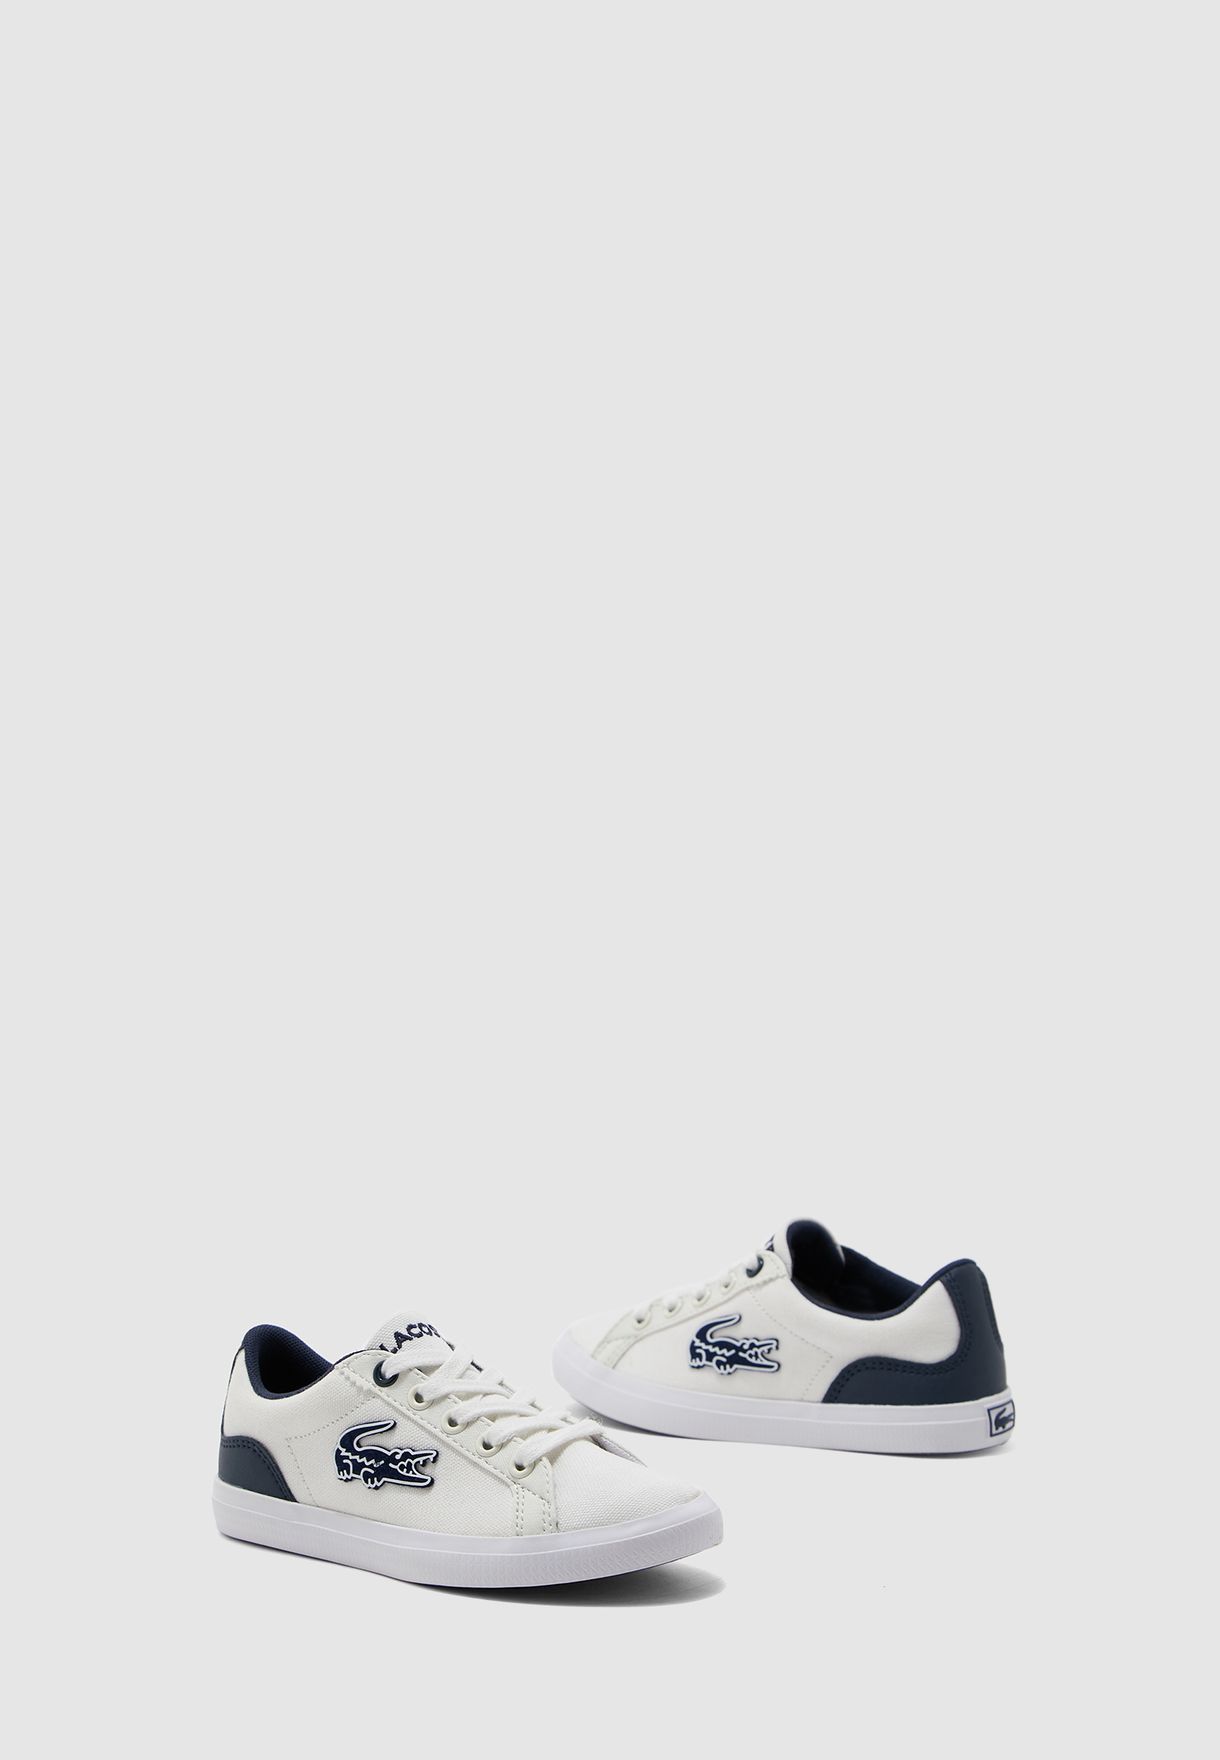 lacoste youth shoes